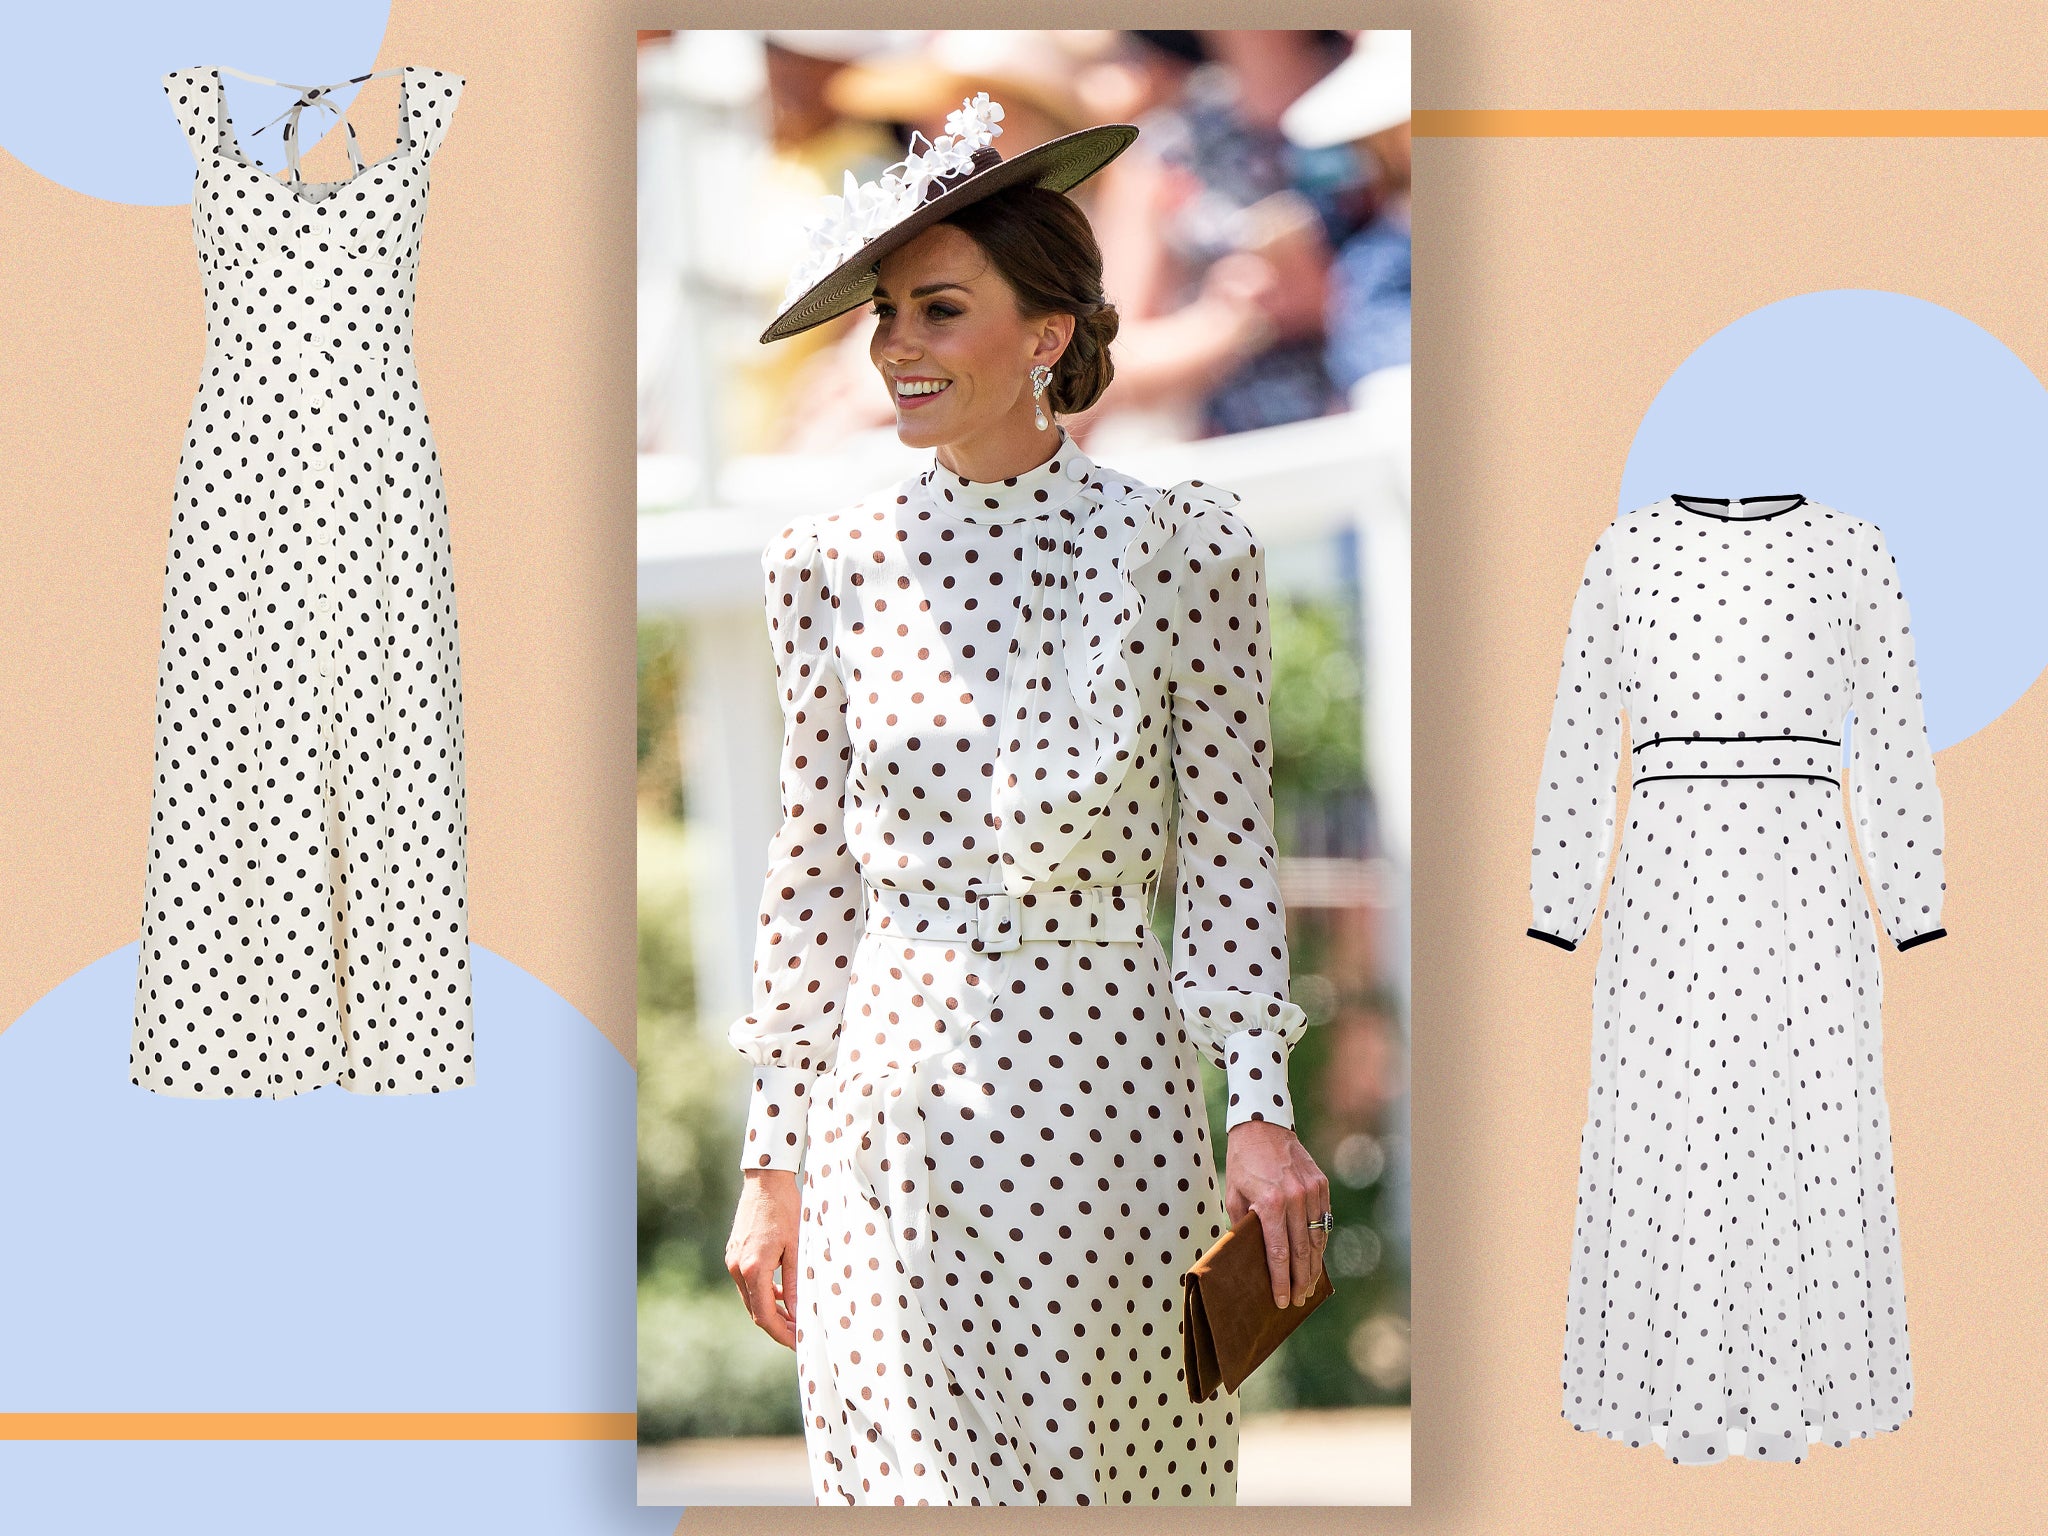 The duchess frequently gravitates towards this print and silhouette